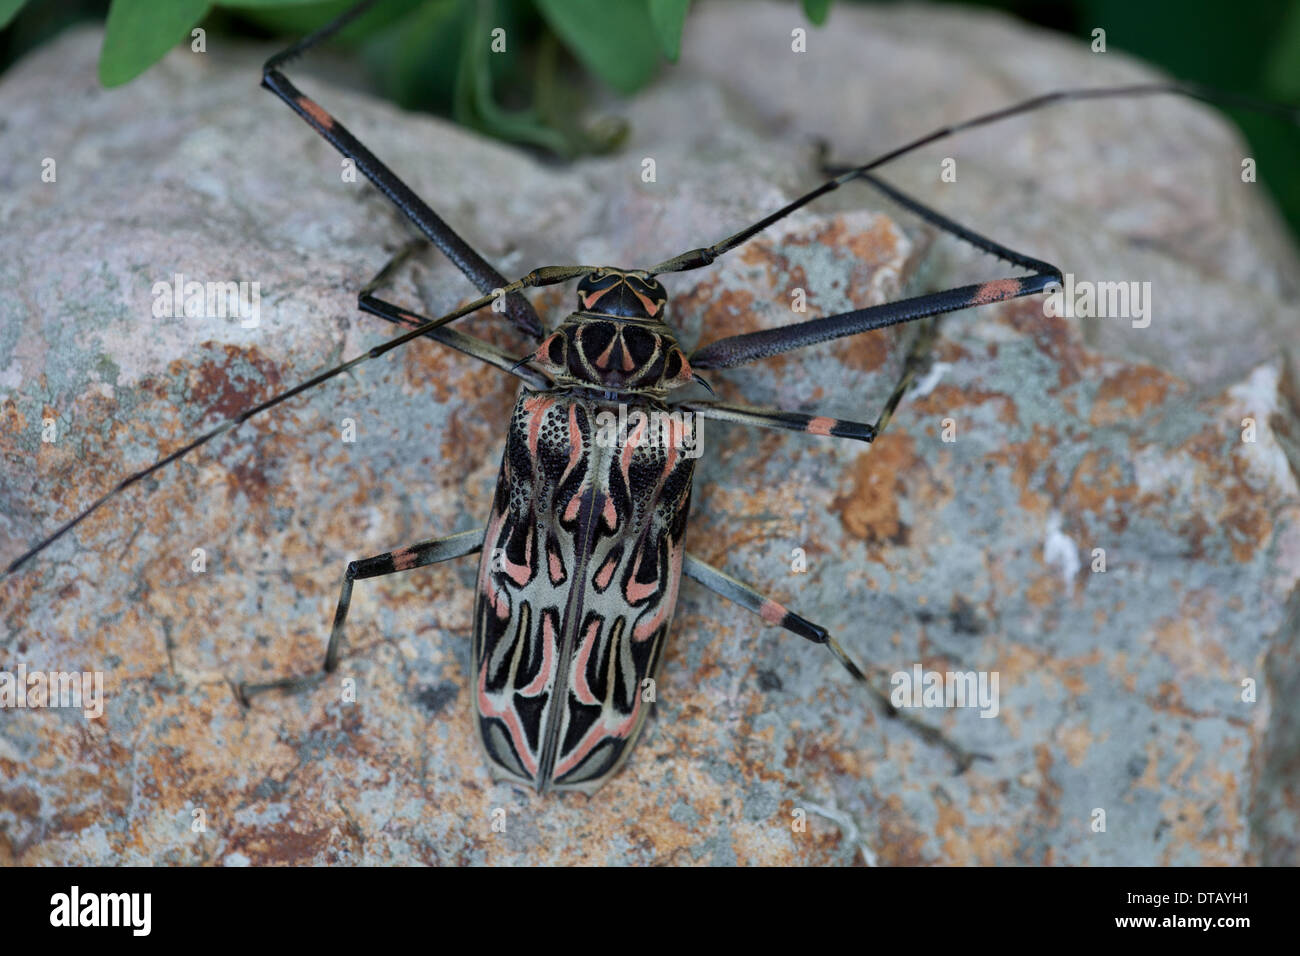 Harlequin Beetle on a rock in the rainforest outside Penonome, Cocle province, Republic of Panama. Stock Photo